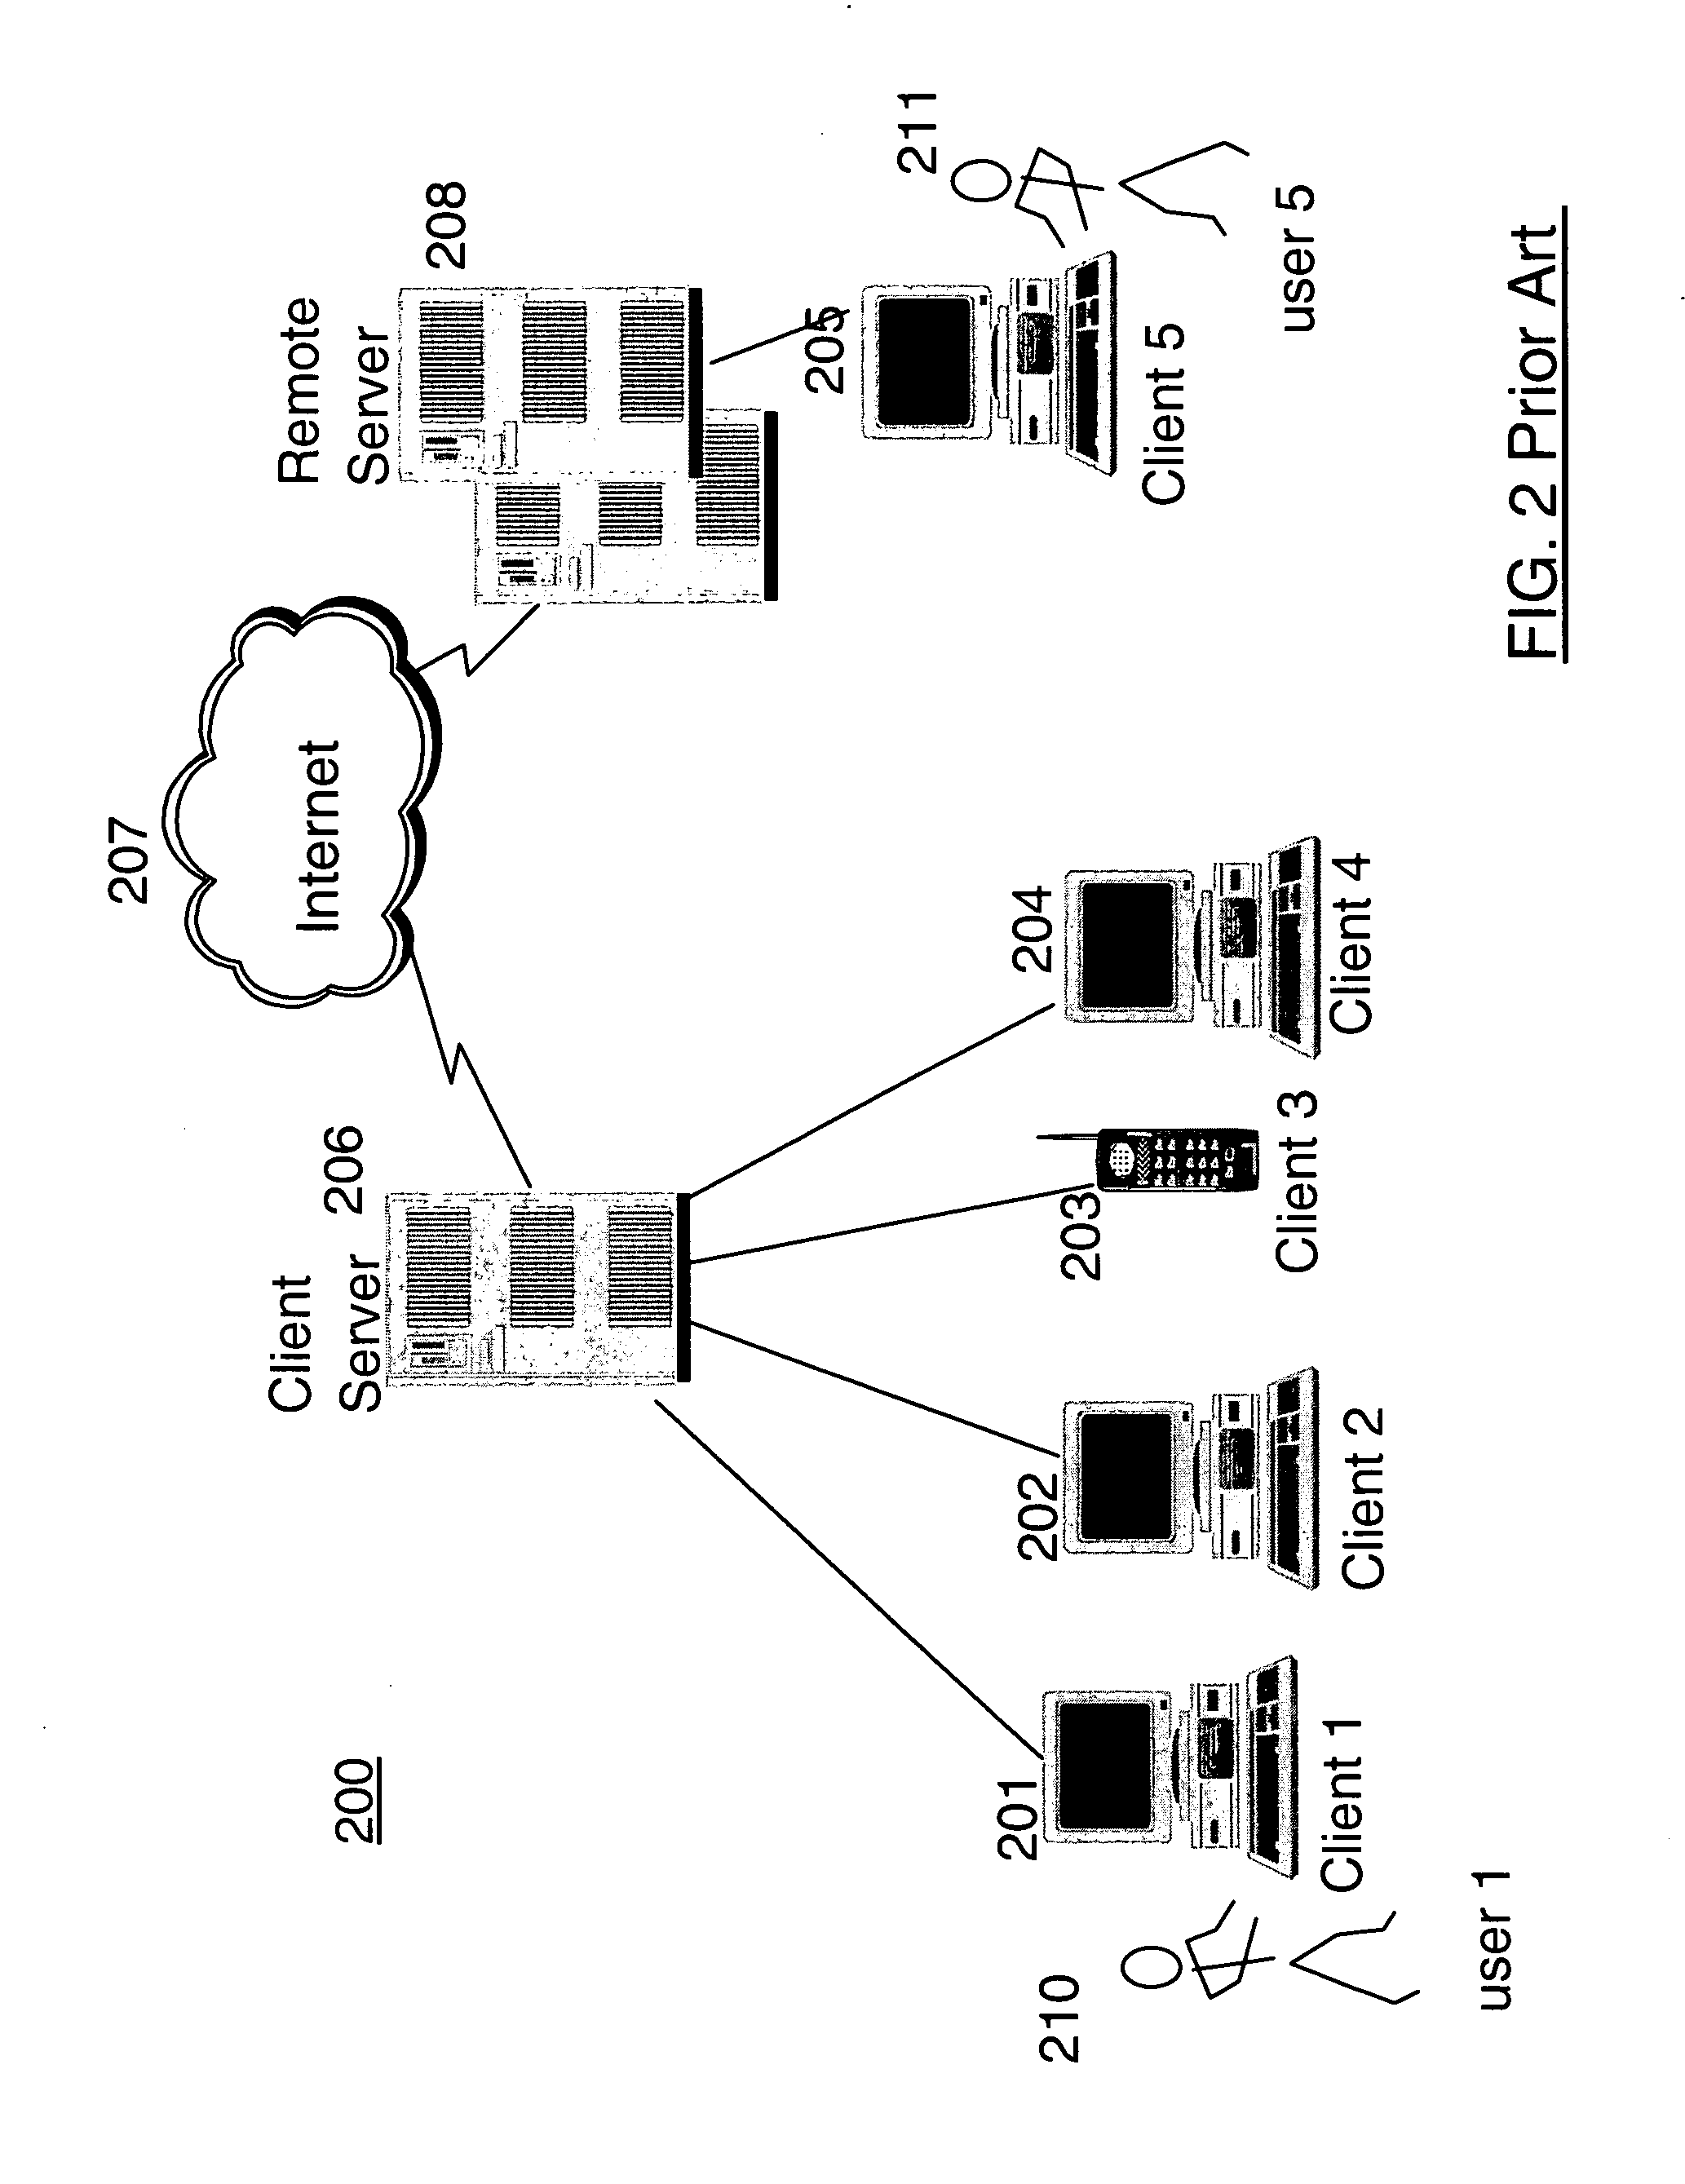 Mirroring system memory in non-volatile random access memory (NVRAM) for fast power on/off cycling